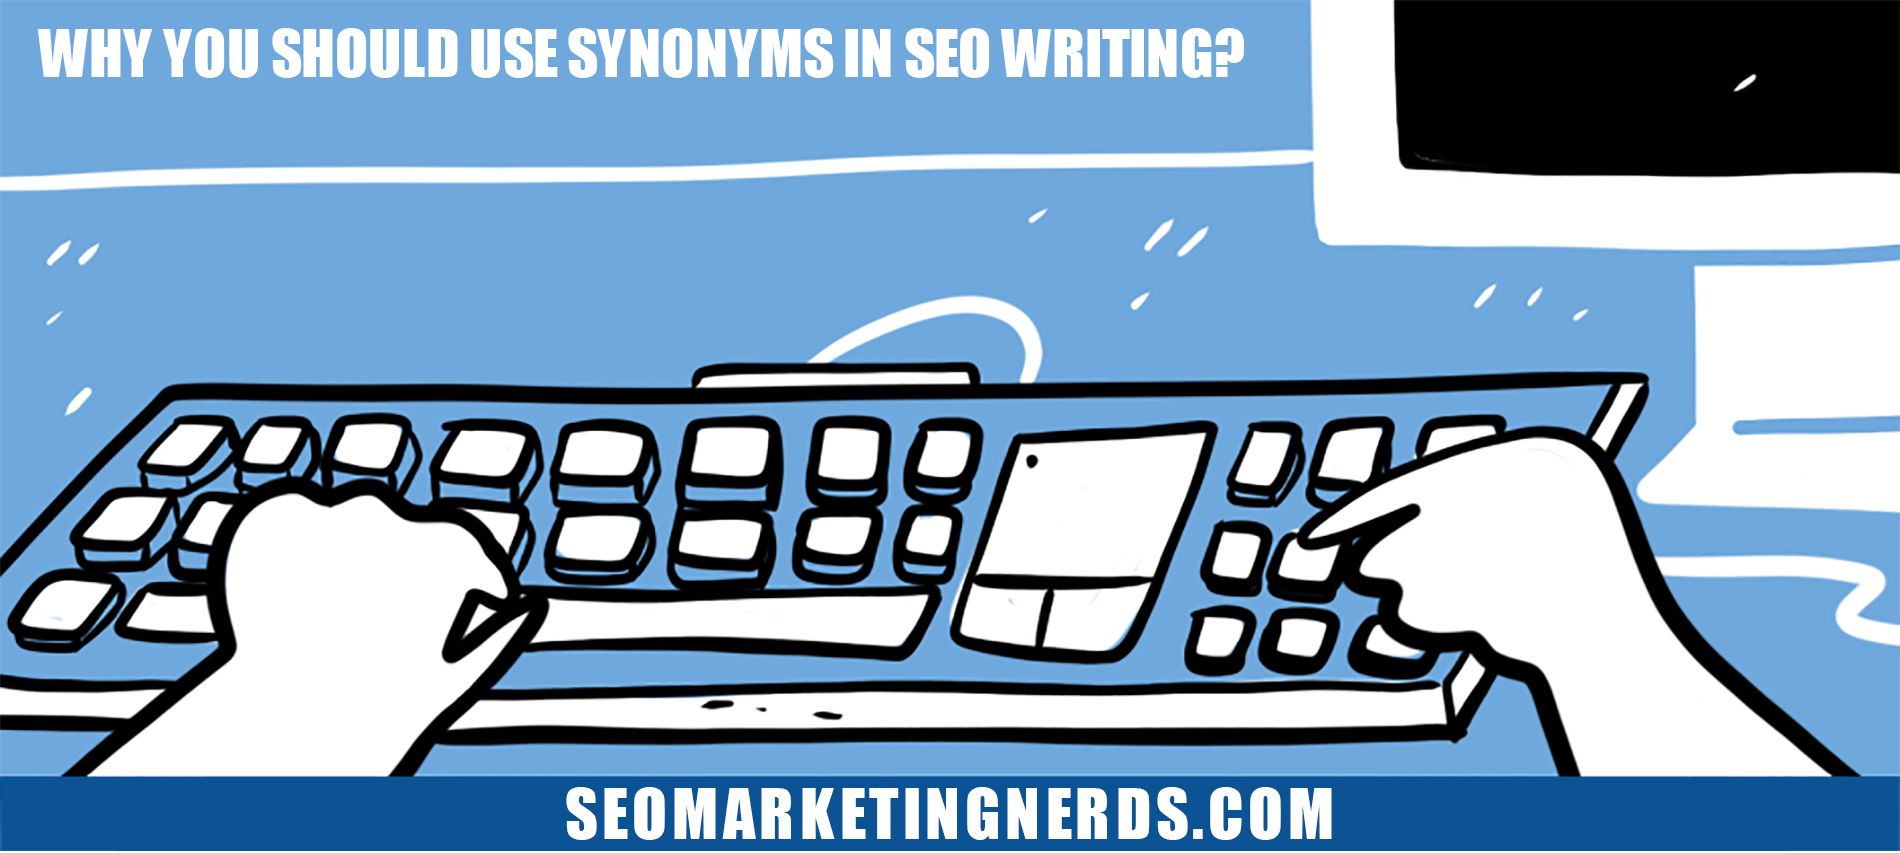 Why you should use synonyms in your SEO writing?